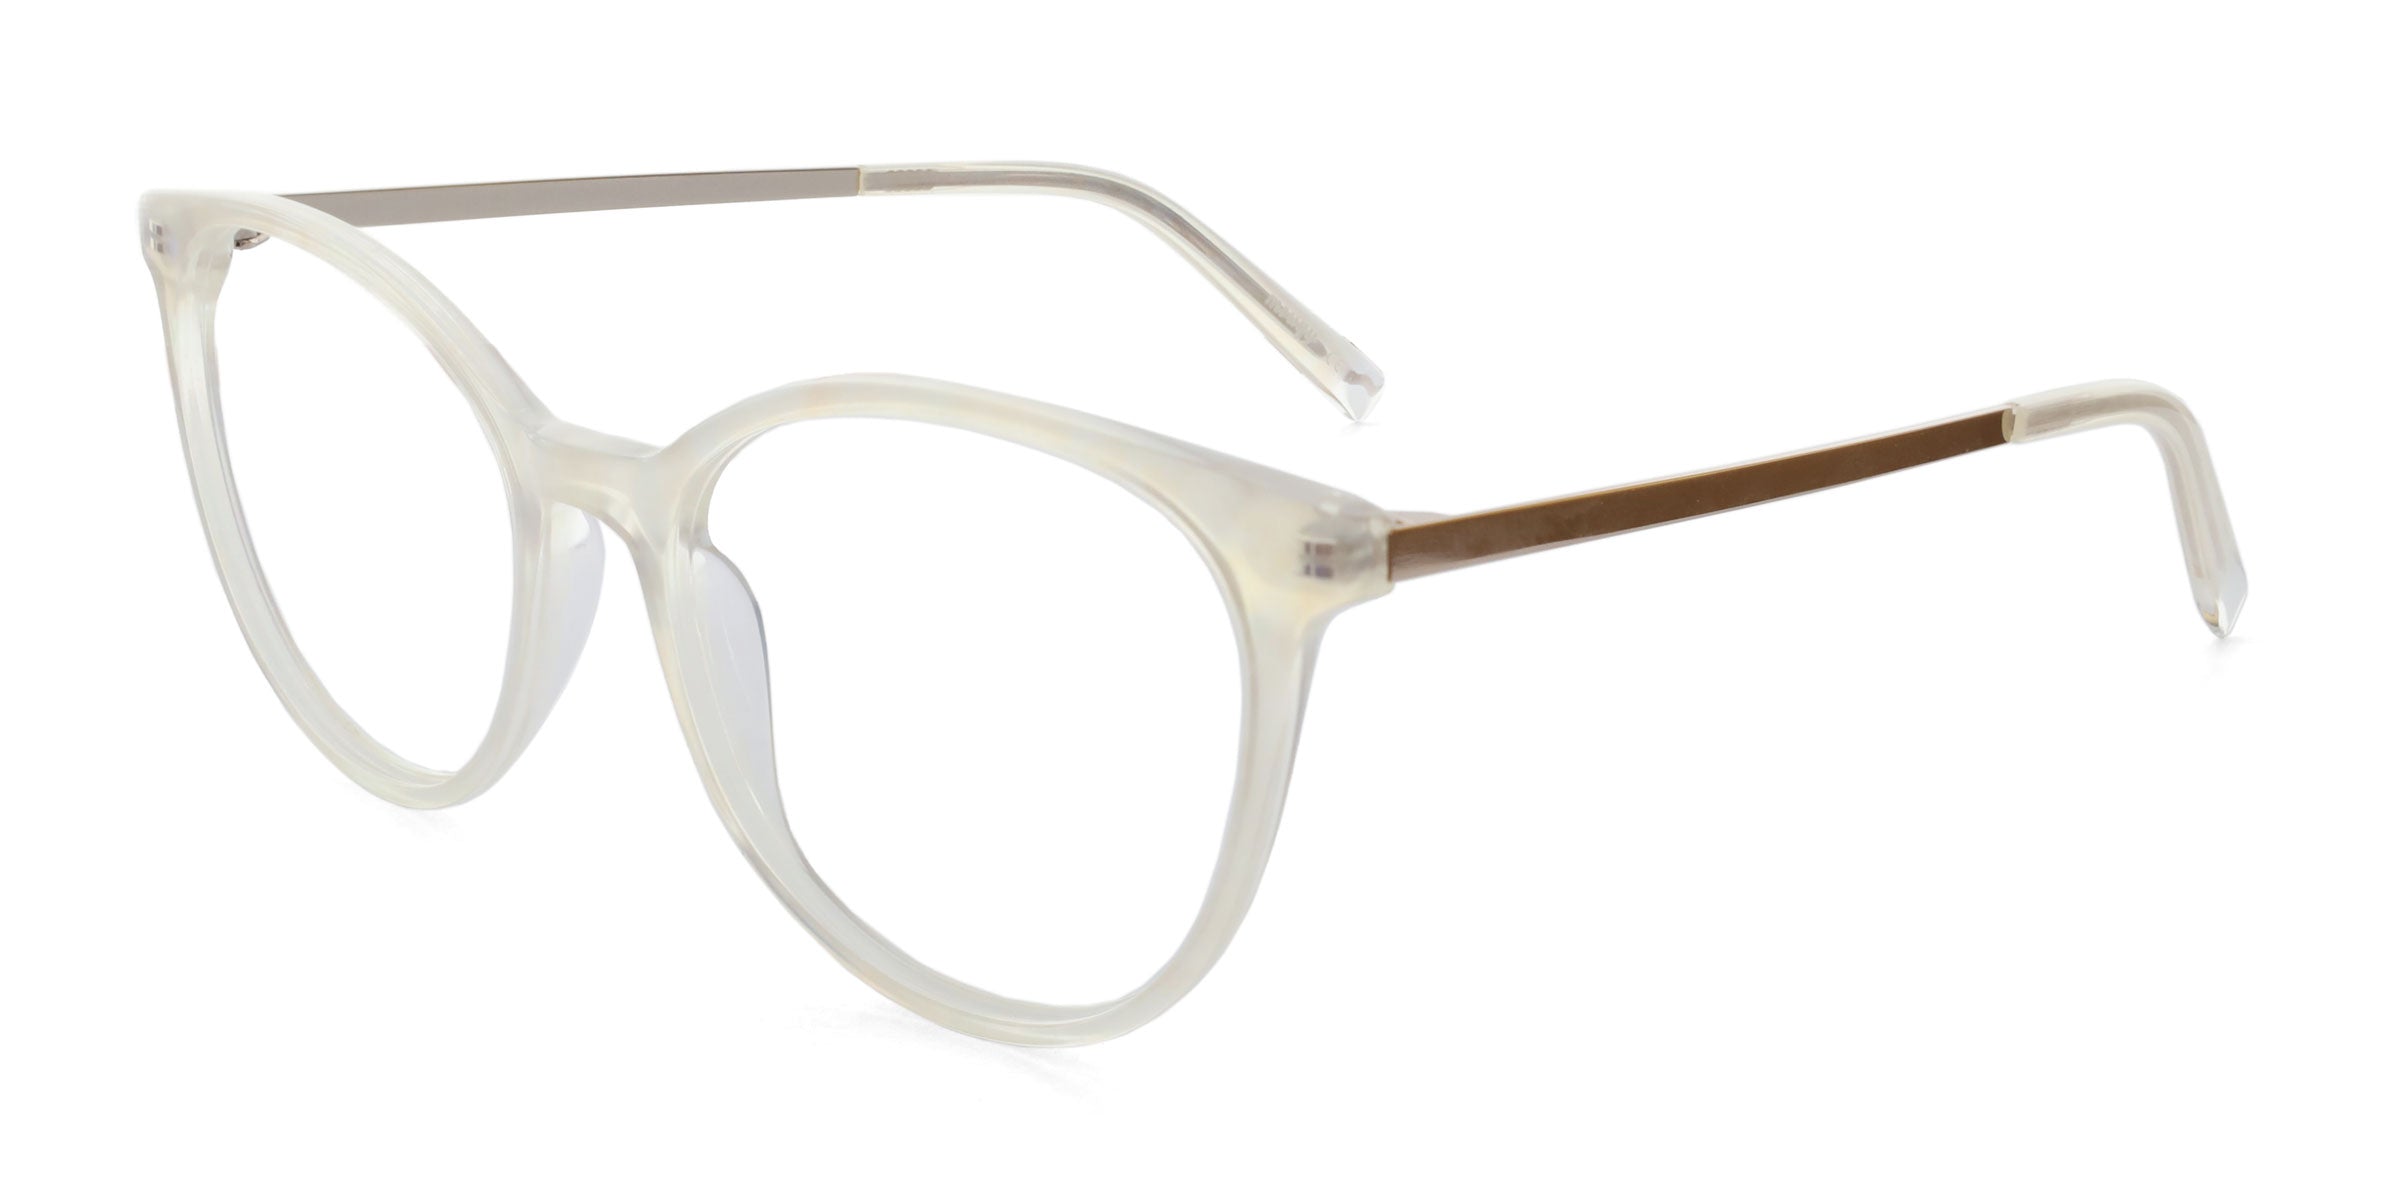 Lucid Oval Yellow eyeglasses frames angled view